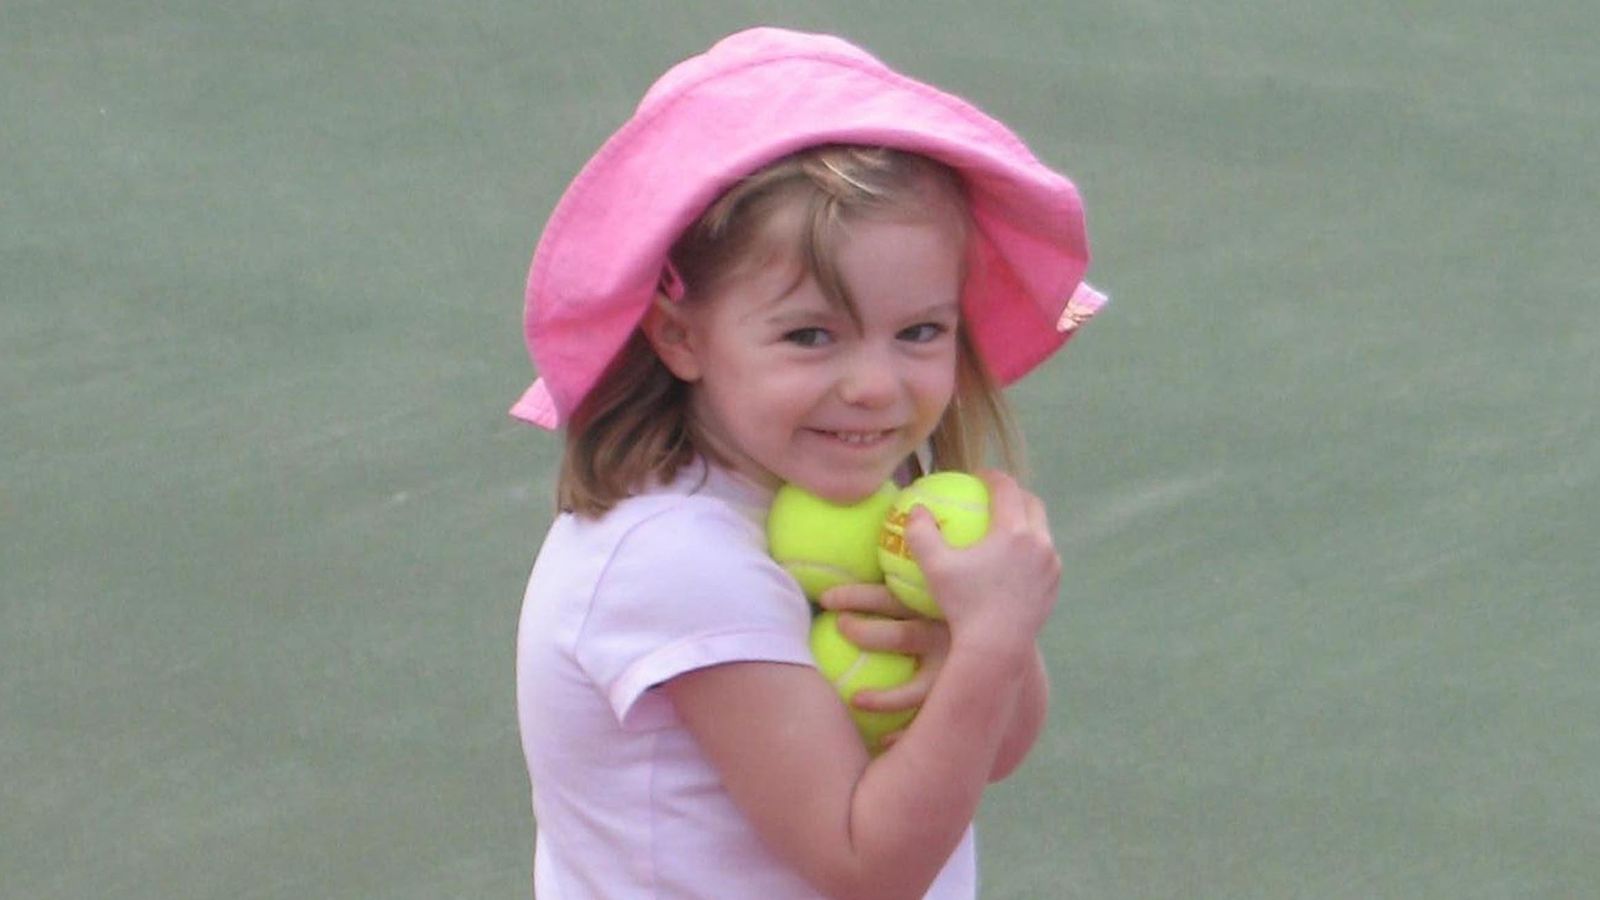 Madeleine McCann's parents say daughter's absence 'aches' and it's a 'living limbo' 17 years since disappearance